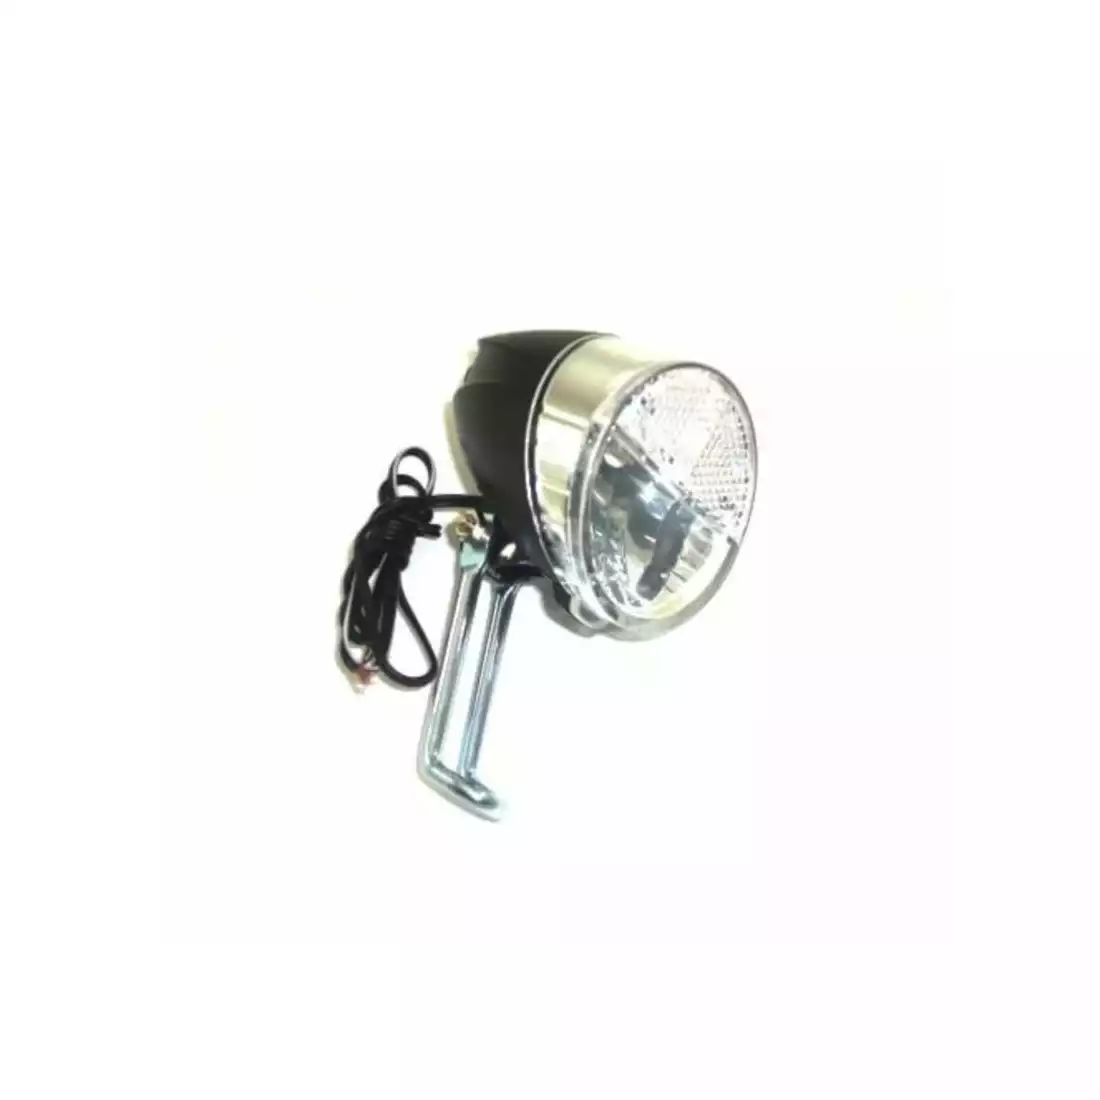 front bicycle lamp JY-7006, silver